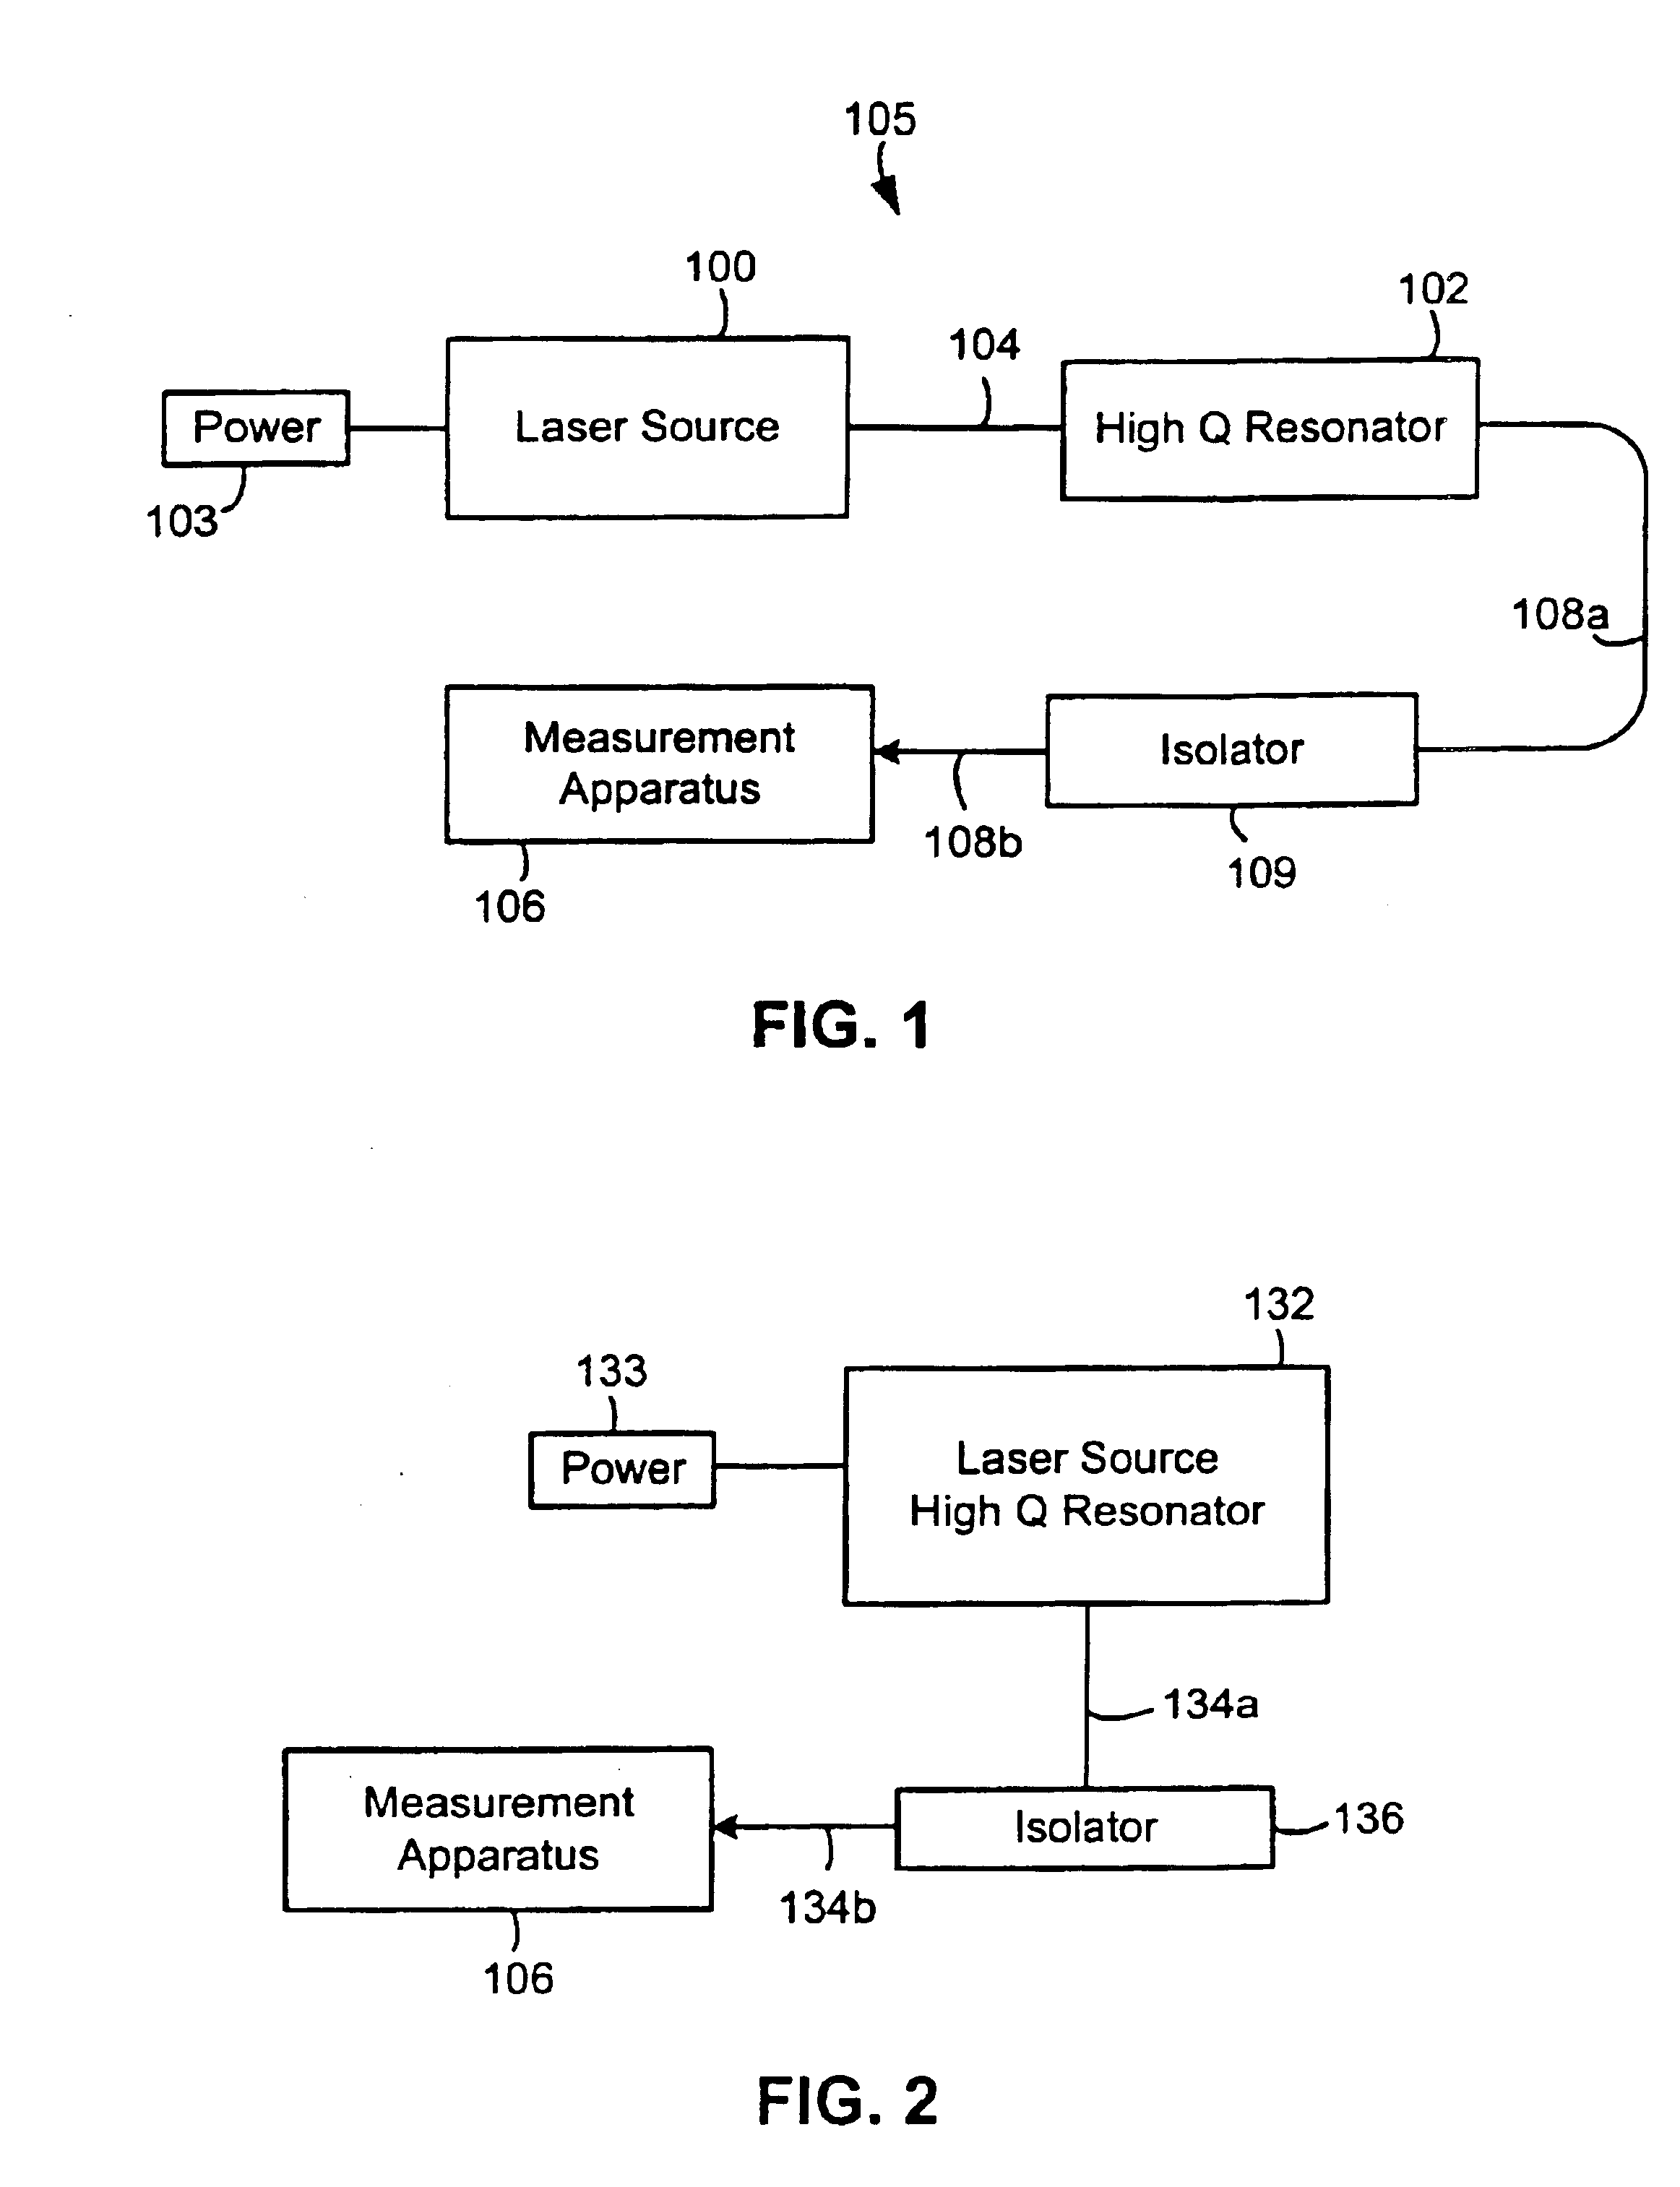 Optical sensor for measuring physical and material properties